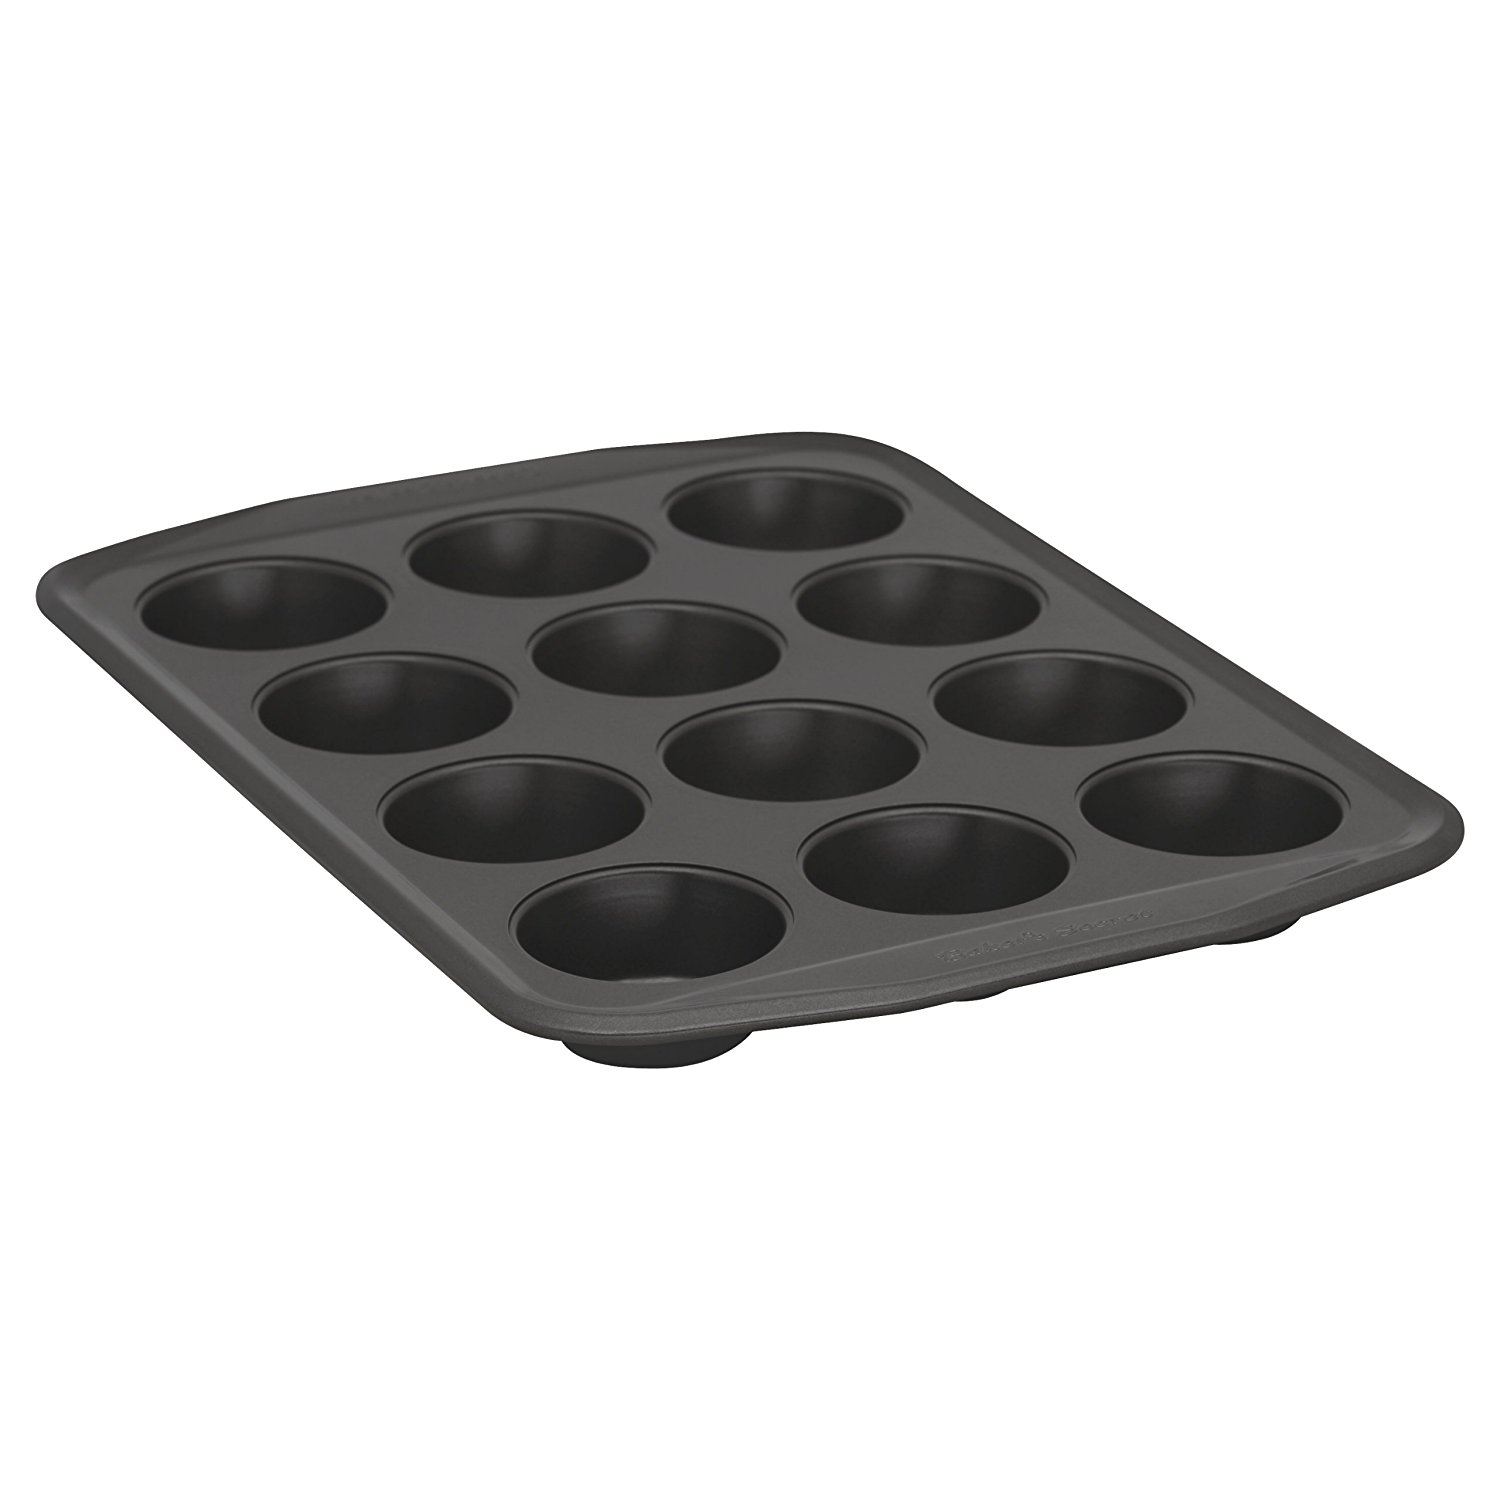 Baker's Secret Signature Steel 12 Cup Muffin Pan - image 2 of 2